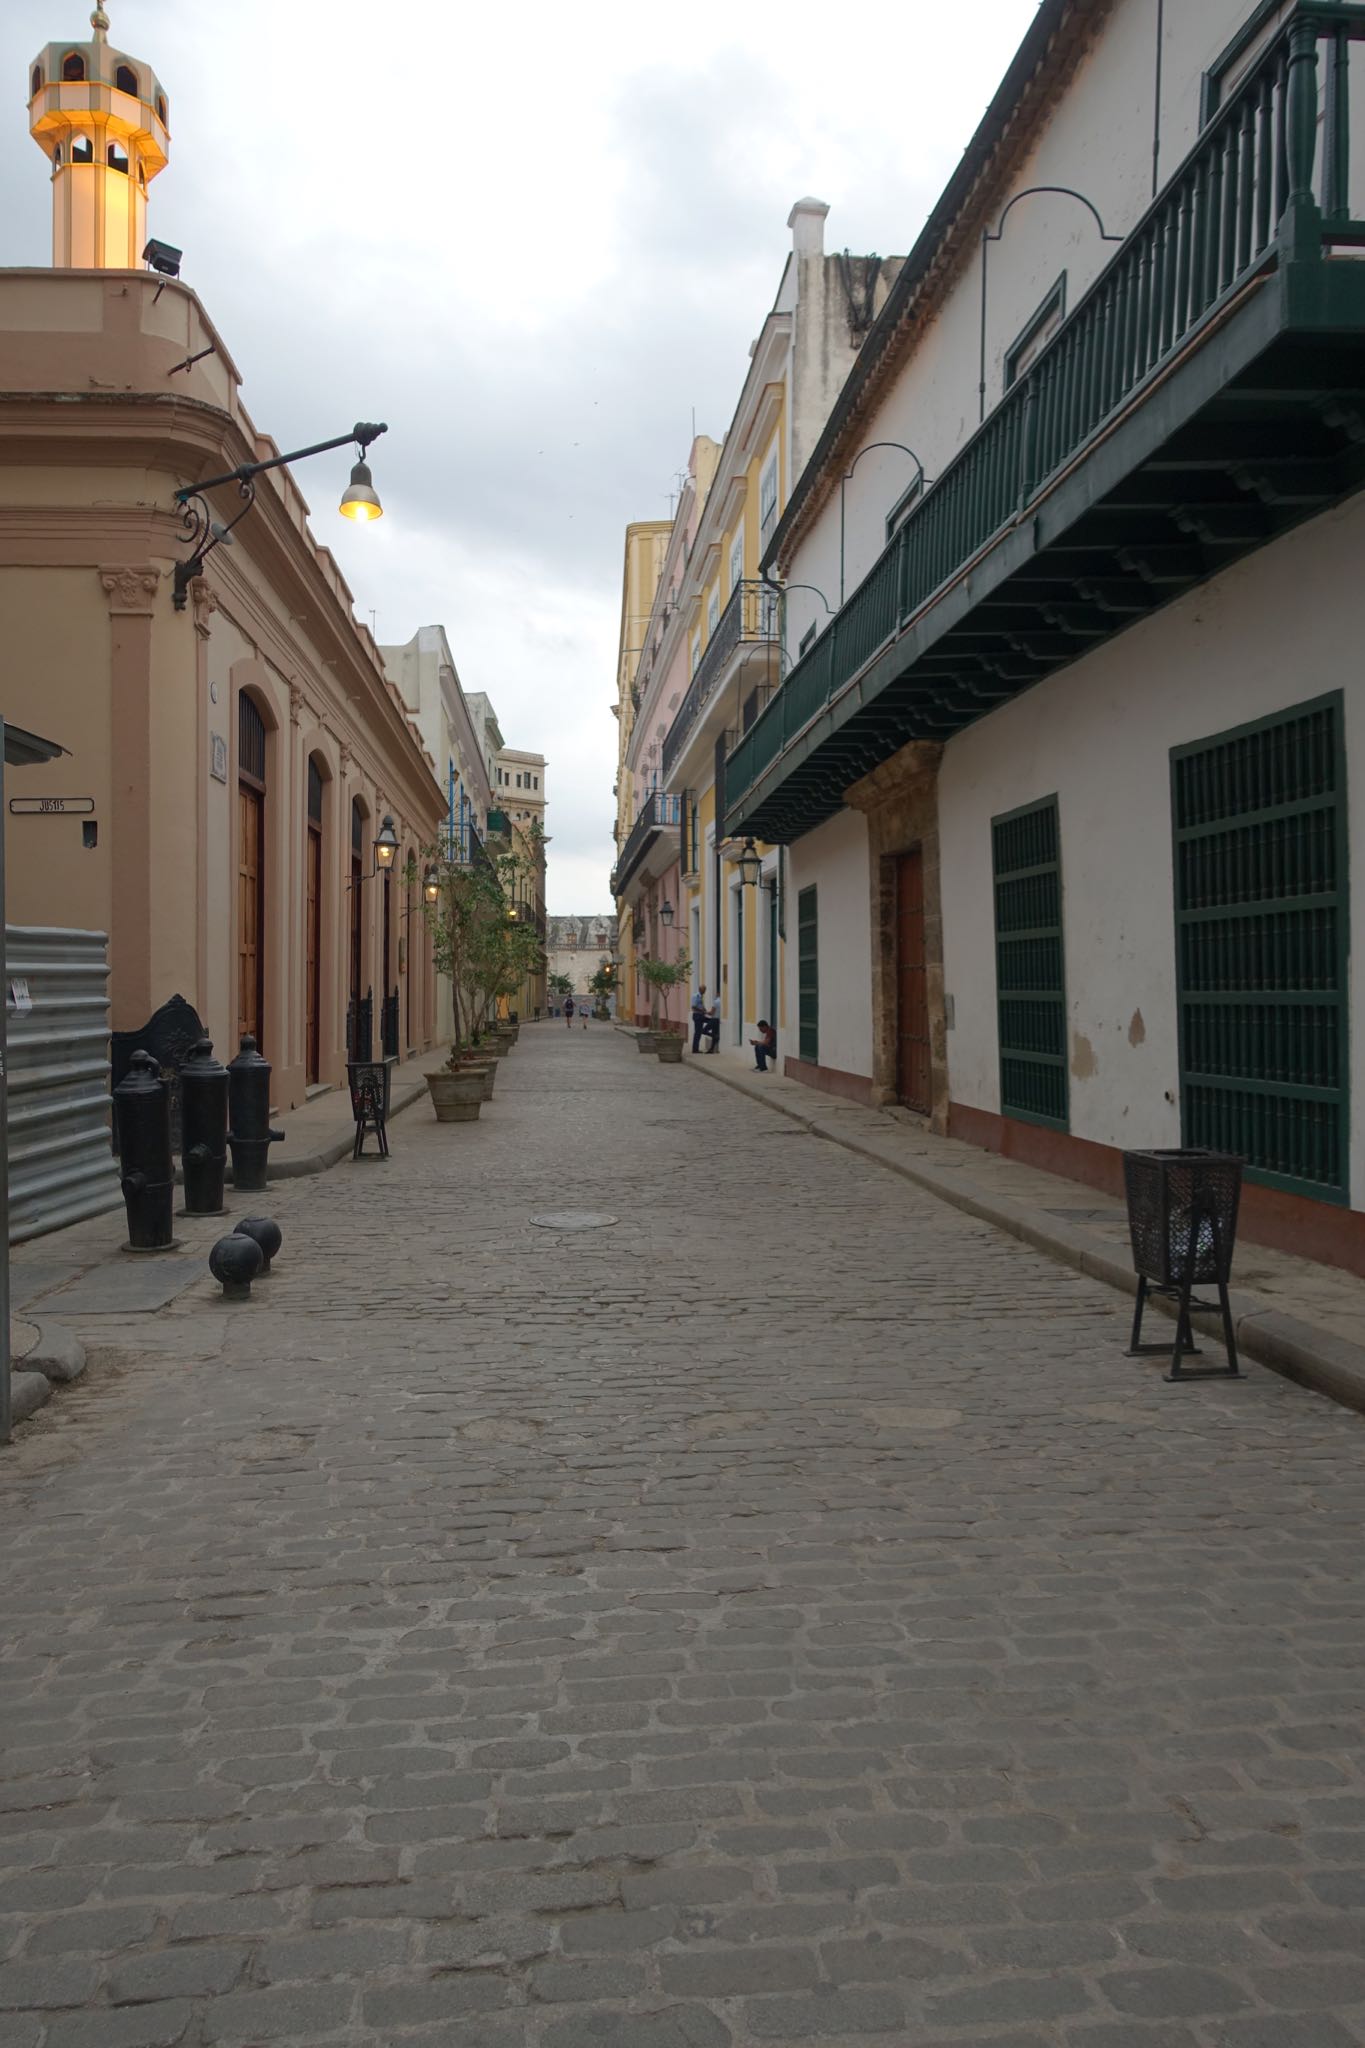 Photo 106 of 221 from the album Highlights Cuba 2019.